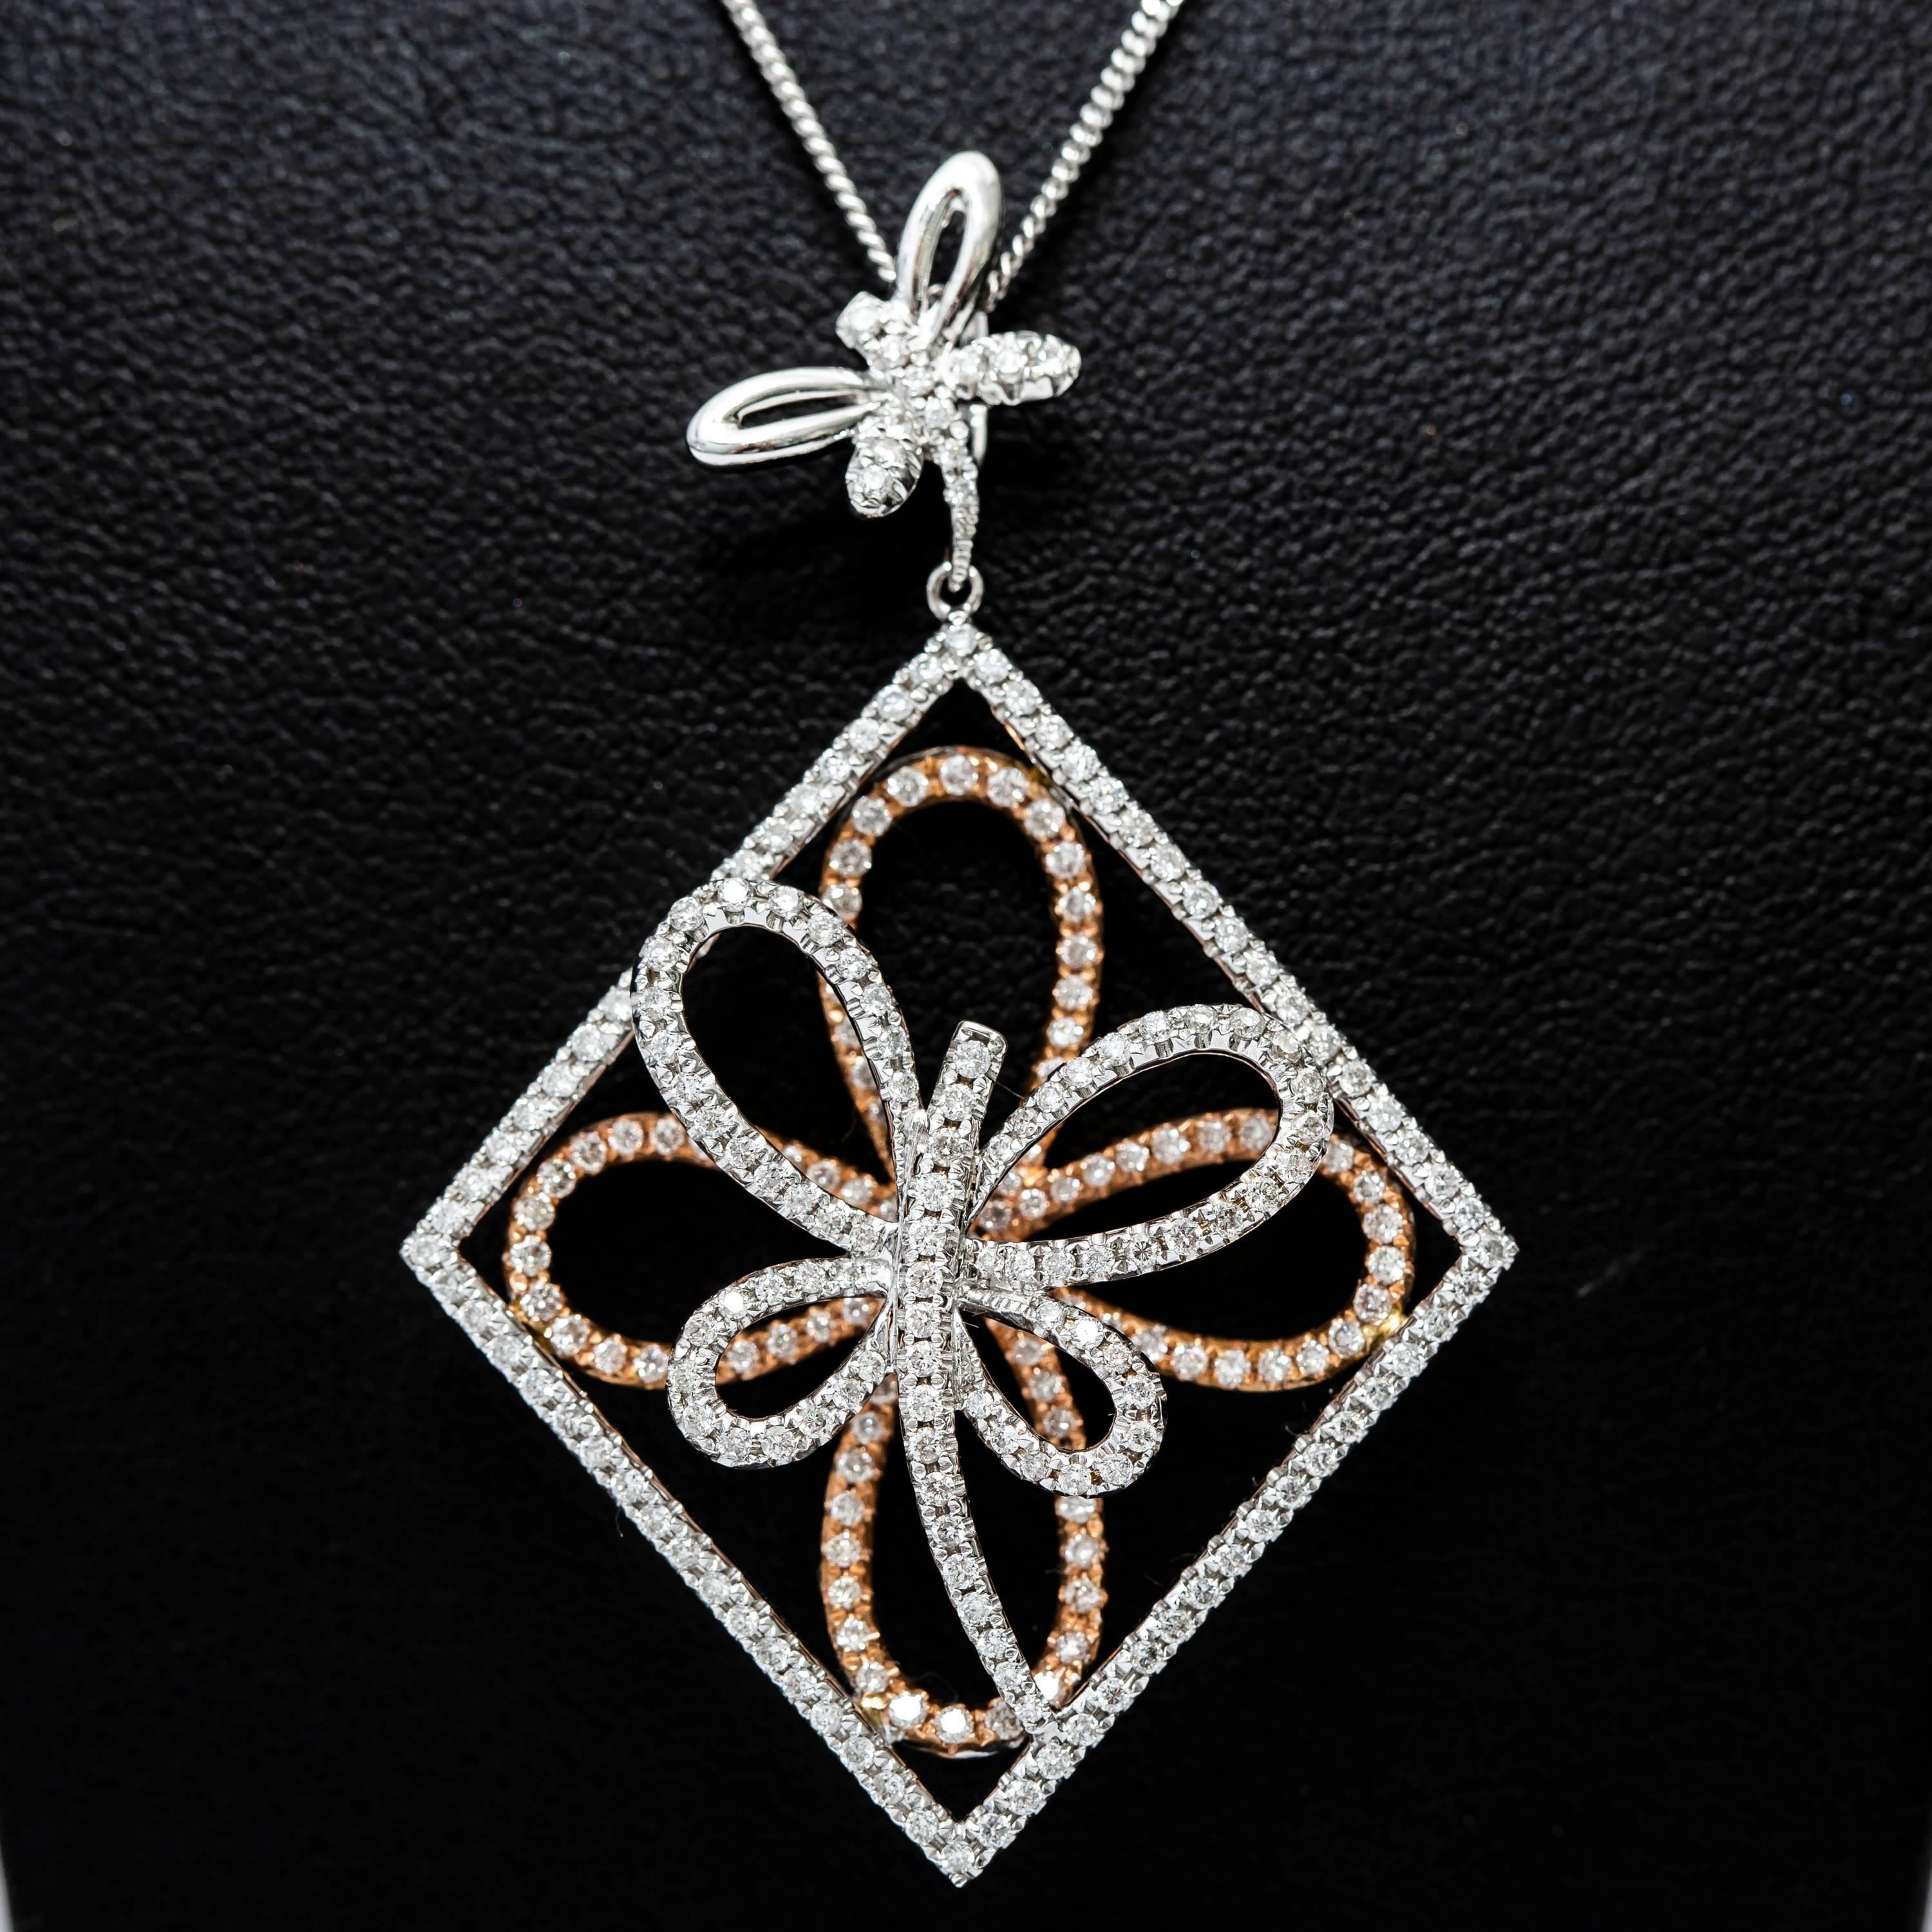 1.31 Carat Round White Diamond Color H Clarity SI1 Fancy Butterfly shaped pendant that hangs on a delicate chain. A uniquely feminine piece set in 18 Karat Rose and White Gold, British Hallmarked.